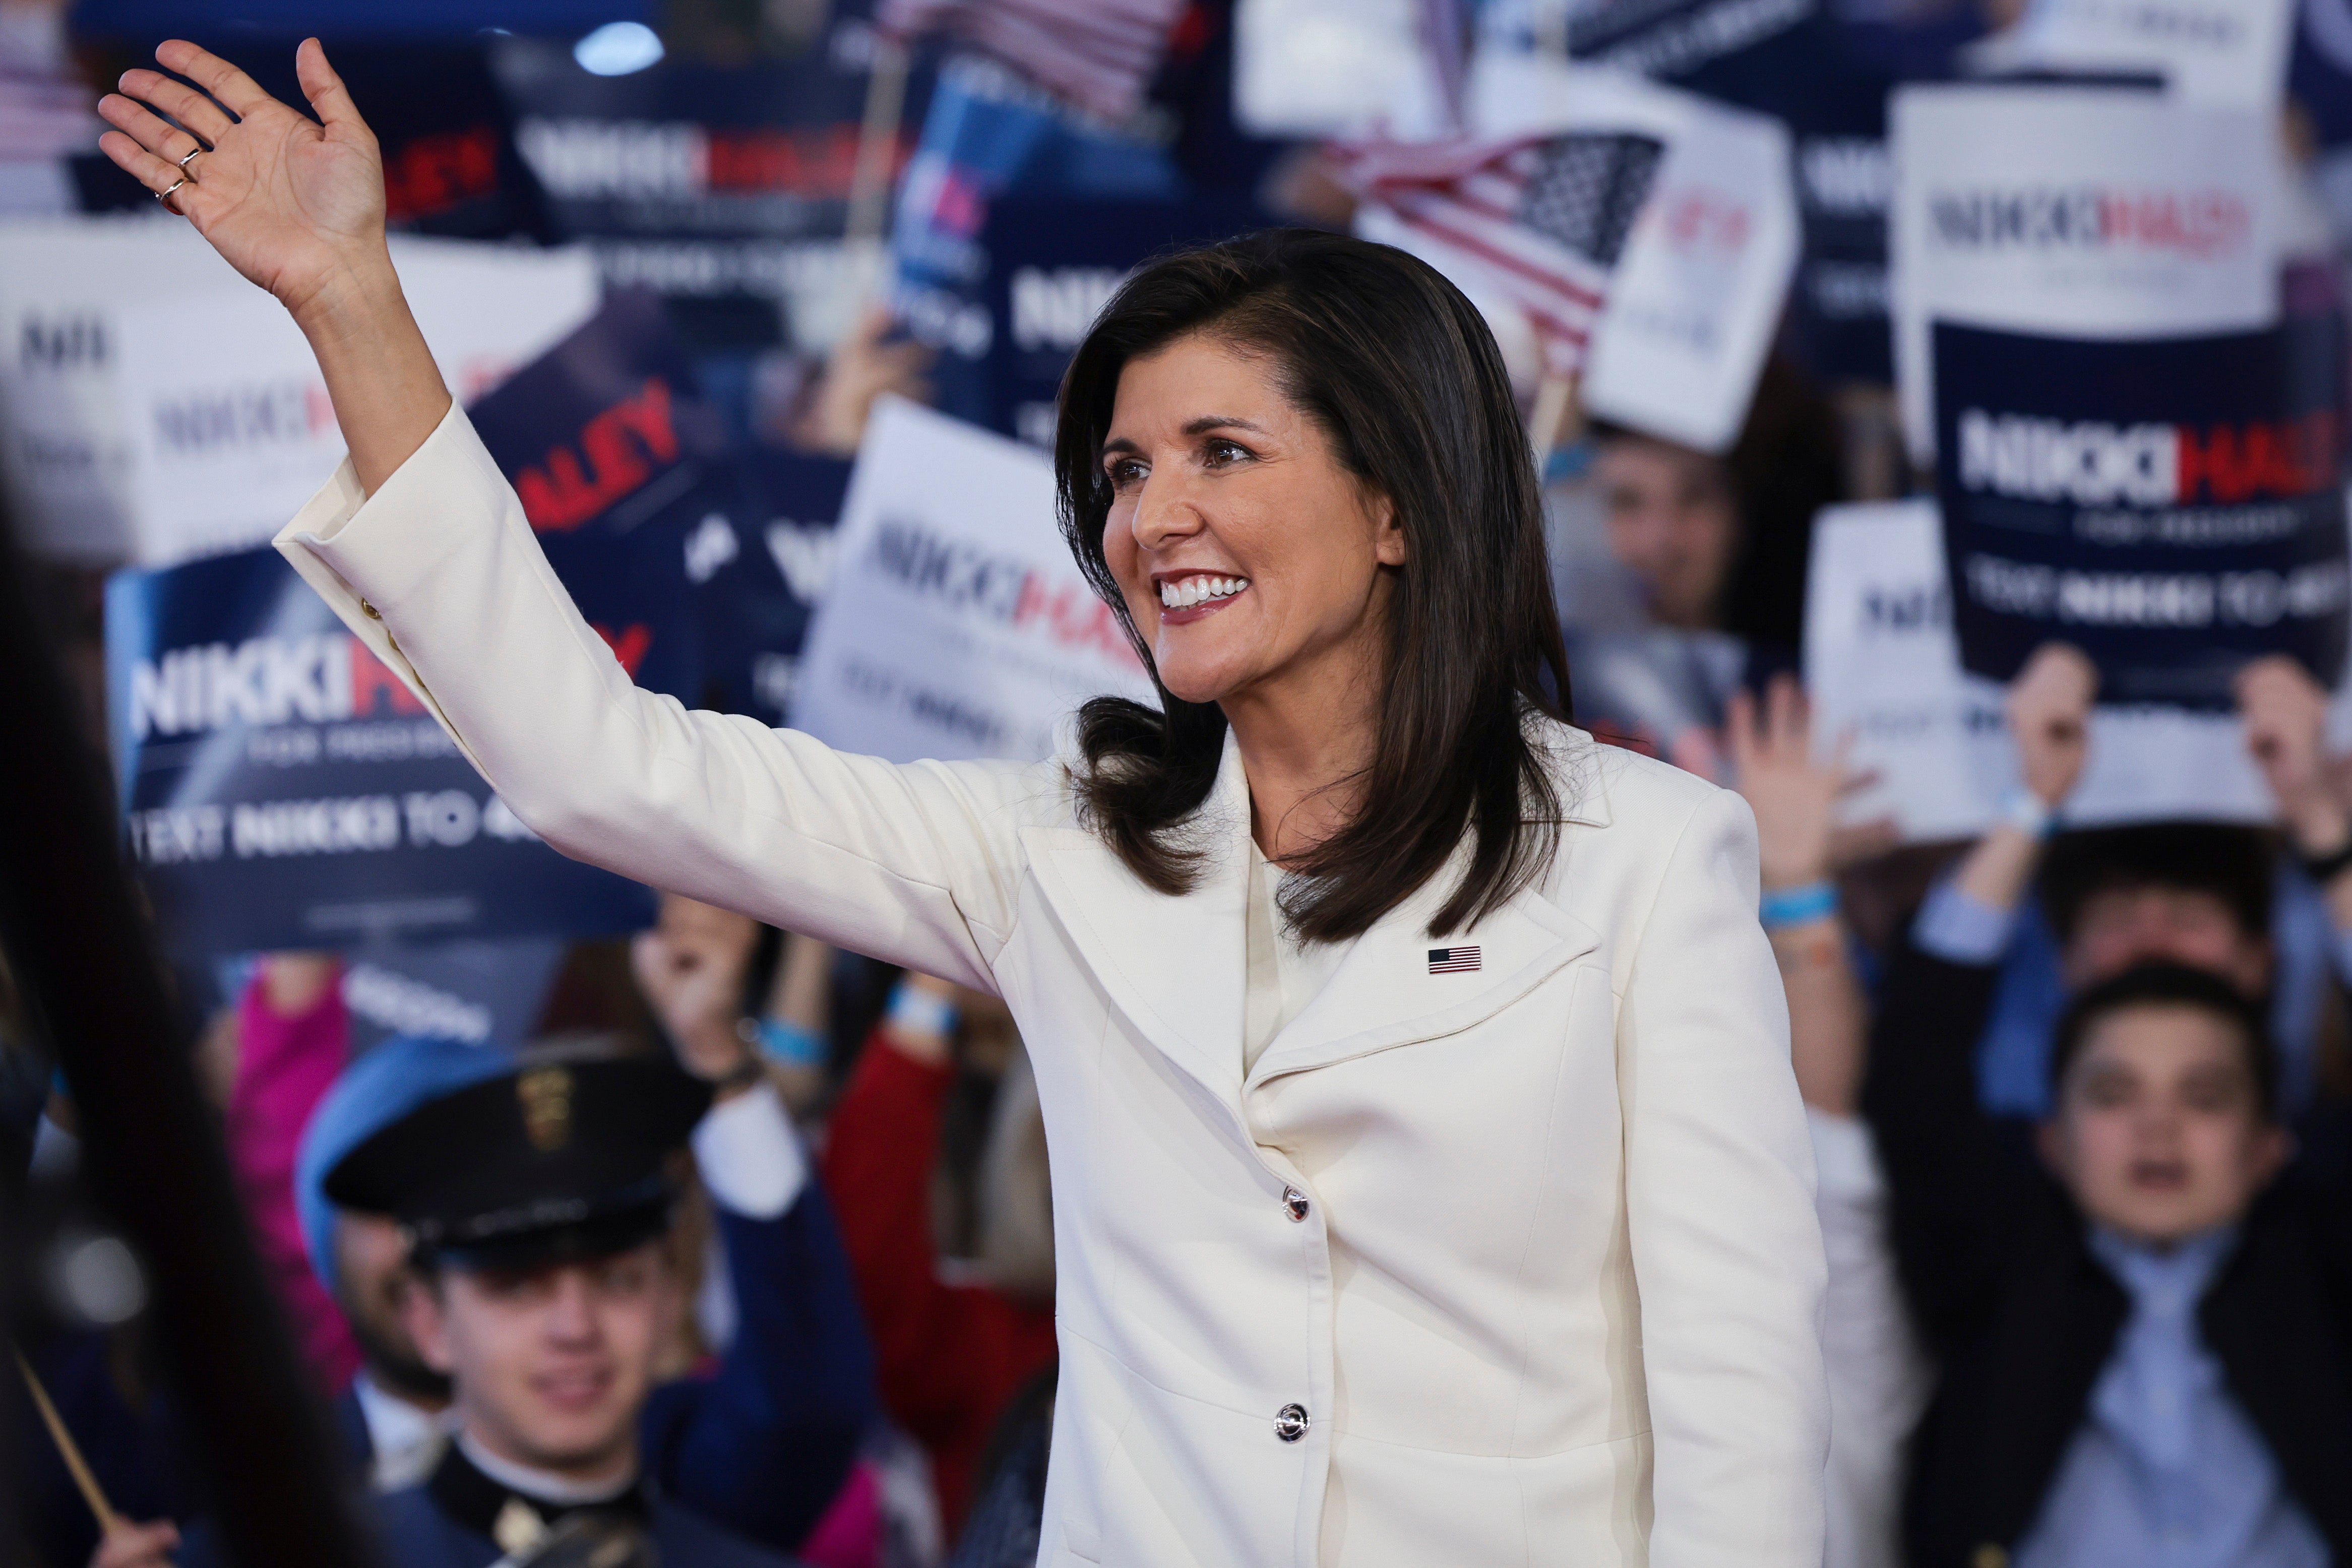 <p>Republican candidate Nikki Haley delivers speech on China in bid to win support</p>